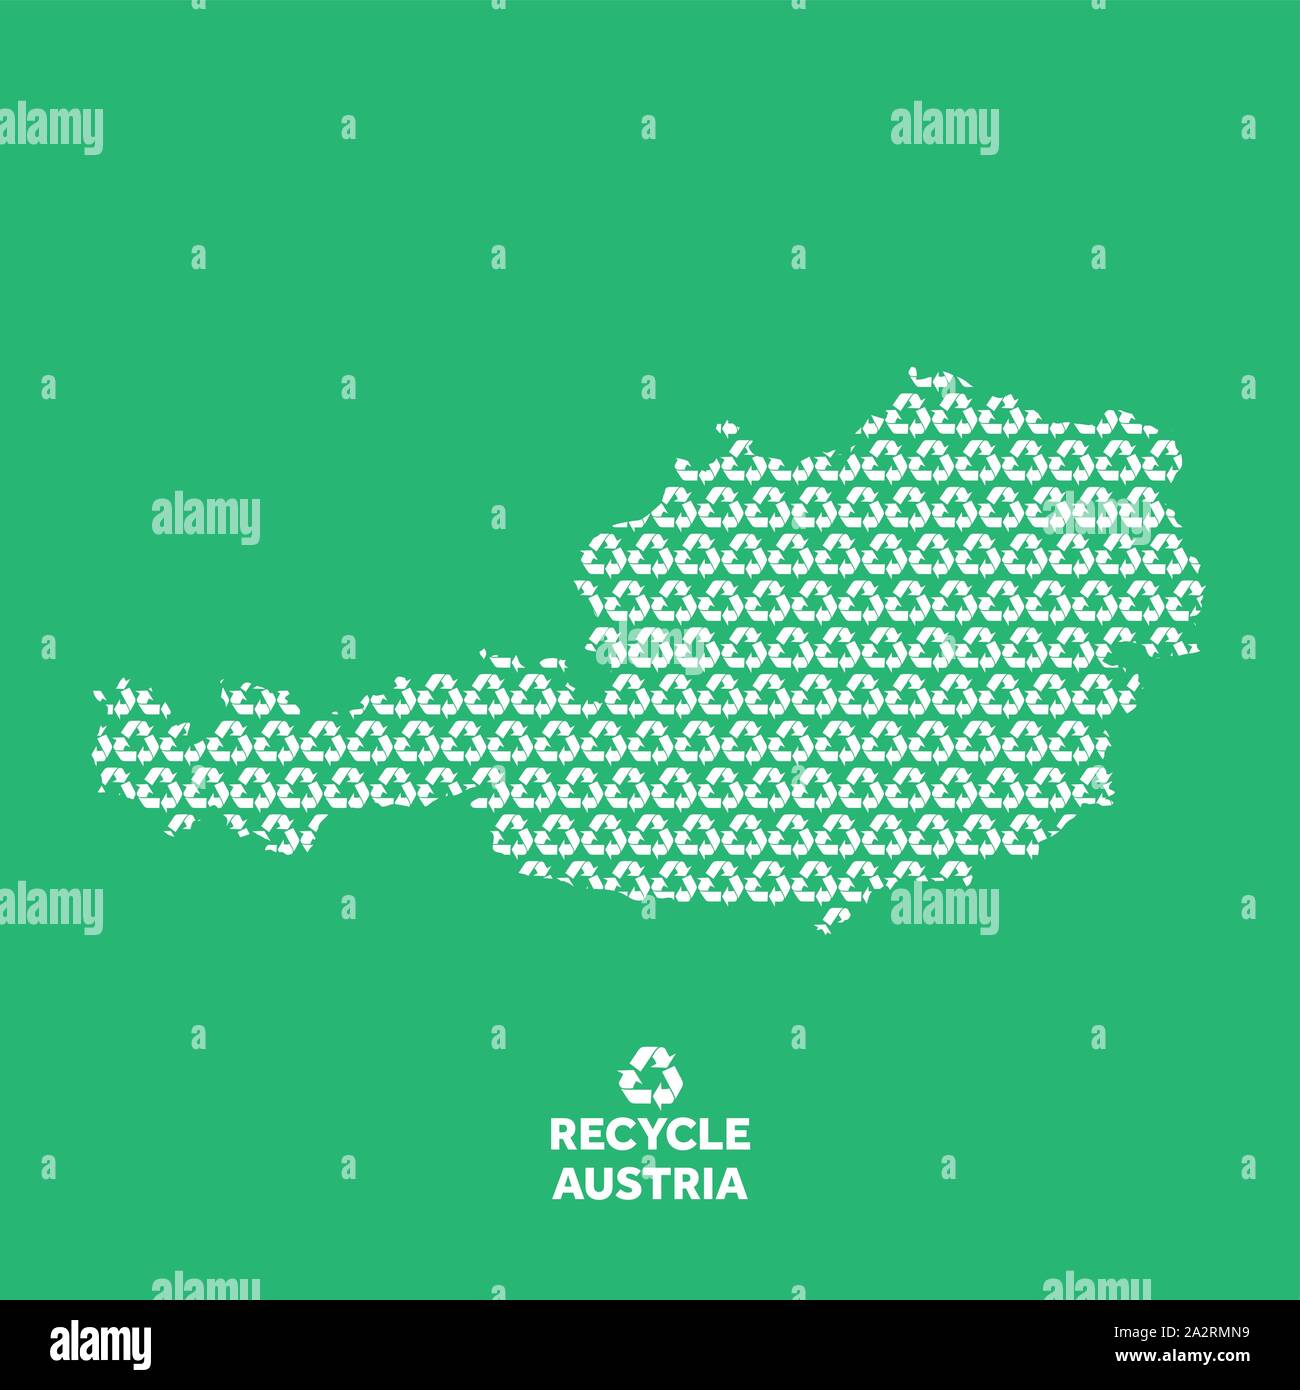 Austria map made from recycling symbol. Environmental concept Stock Vector